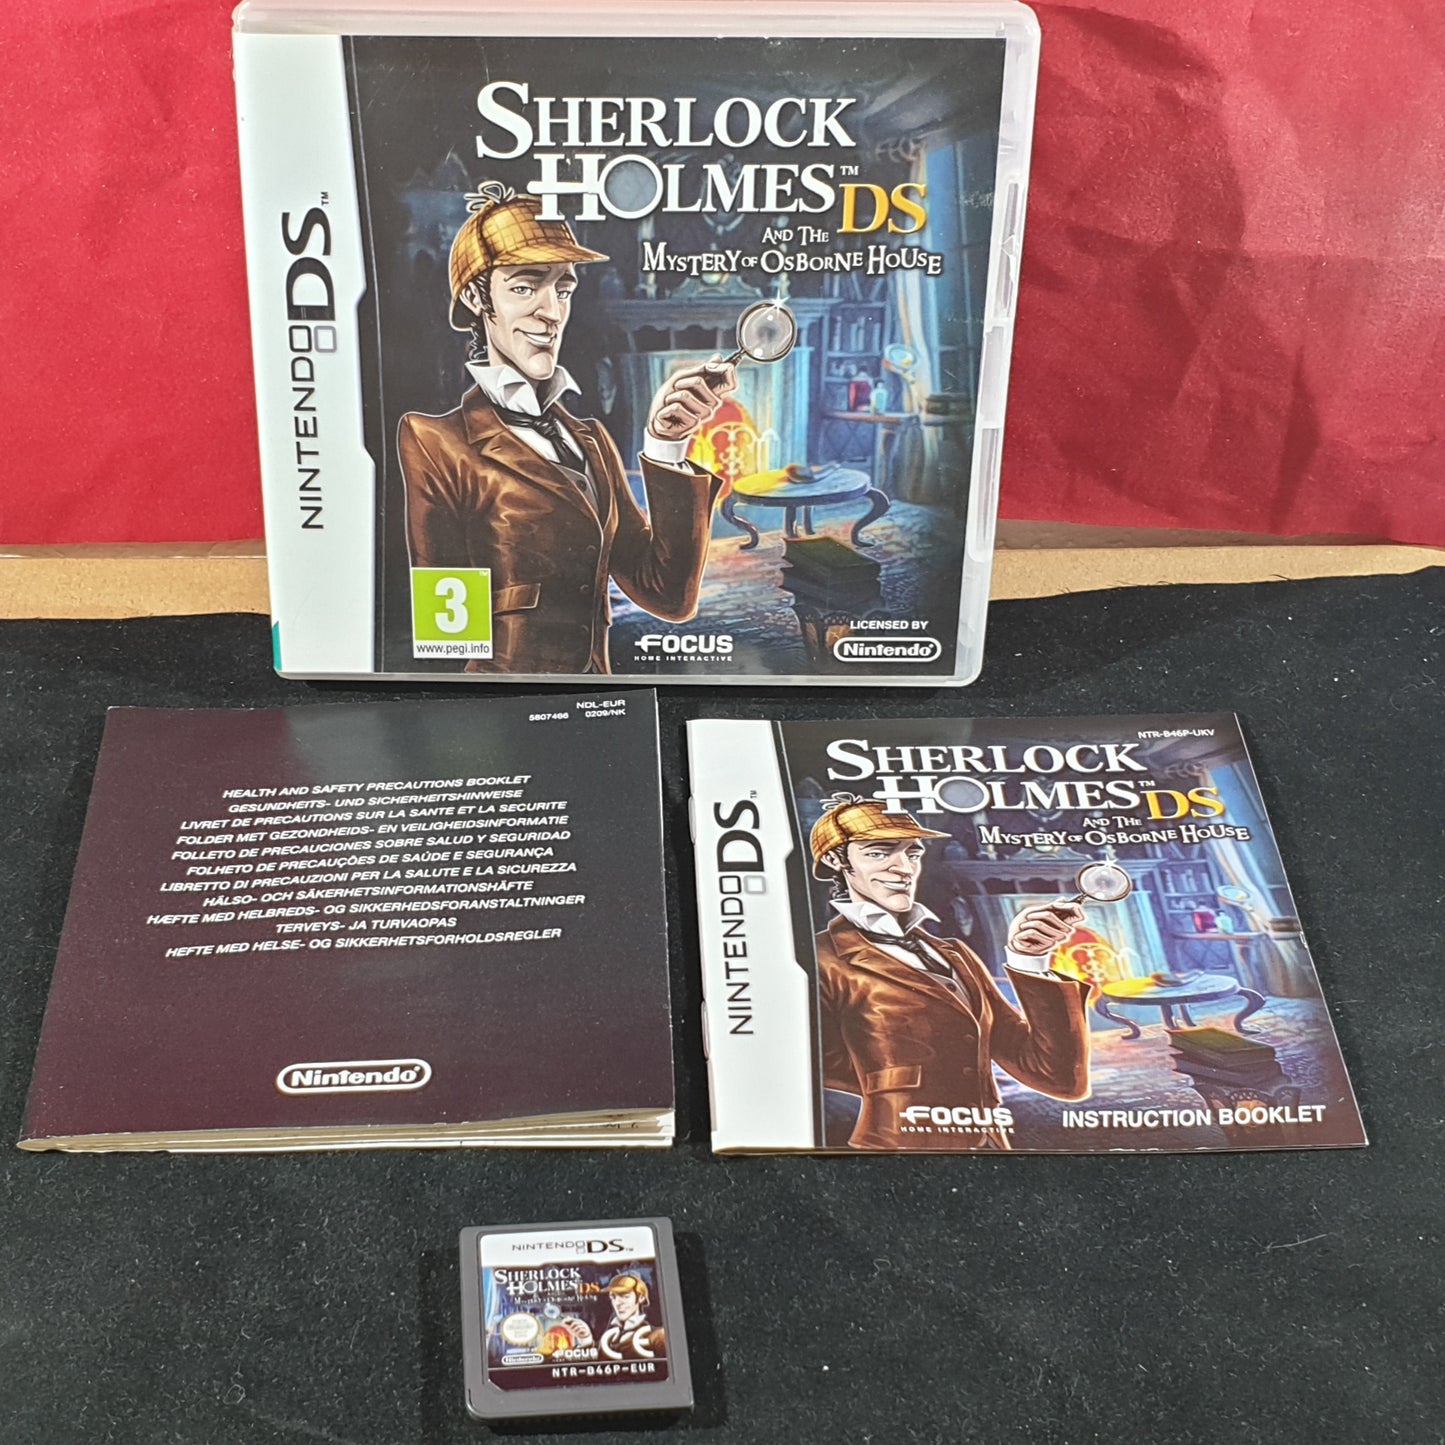 Sherlock Holmes and the Mystery of Osborne House (Nintendo DS) game